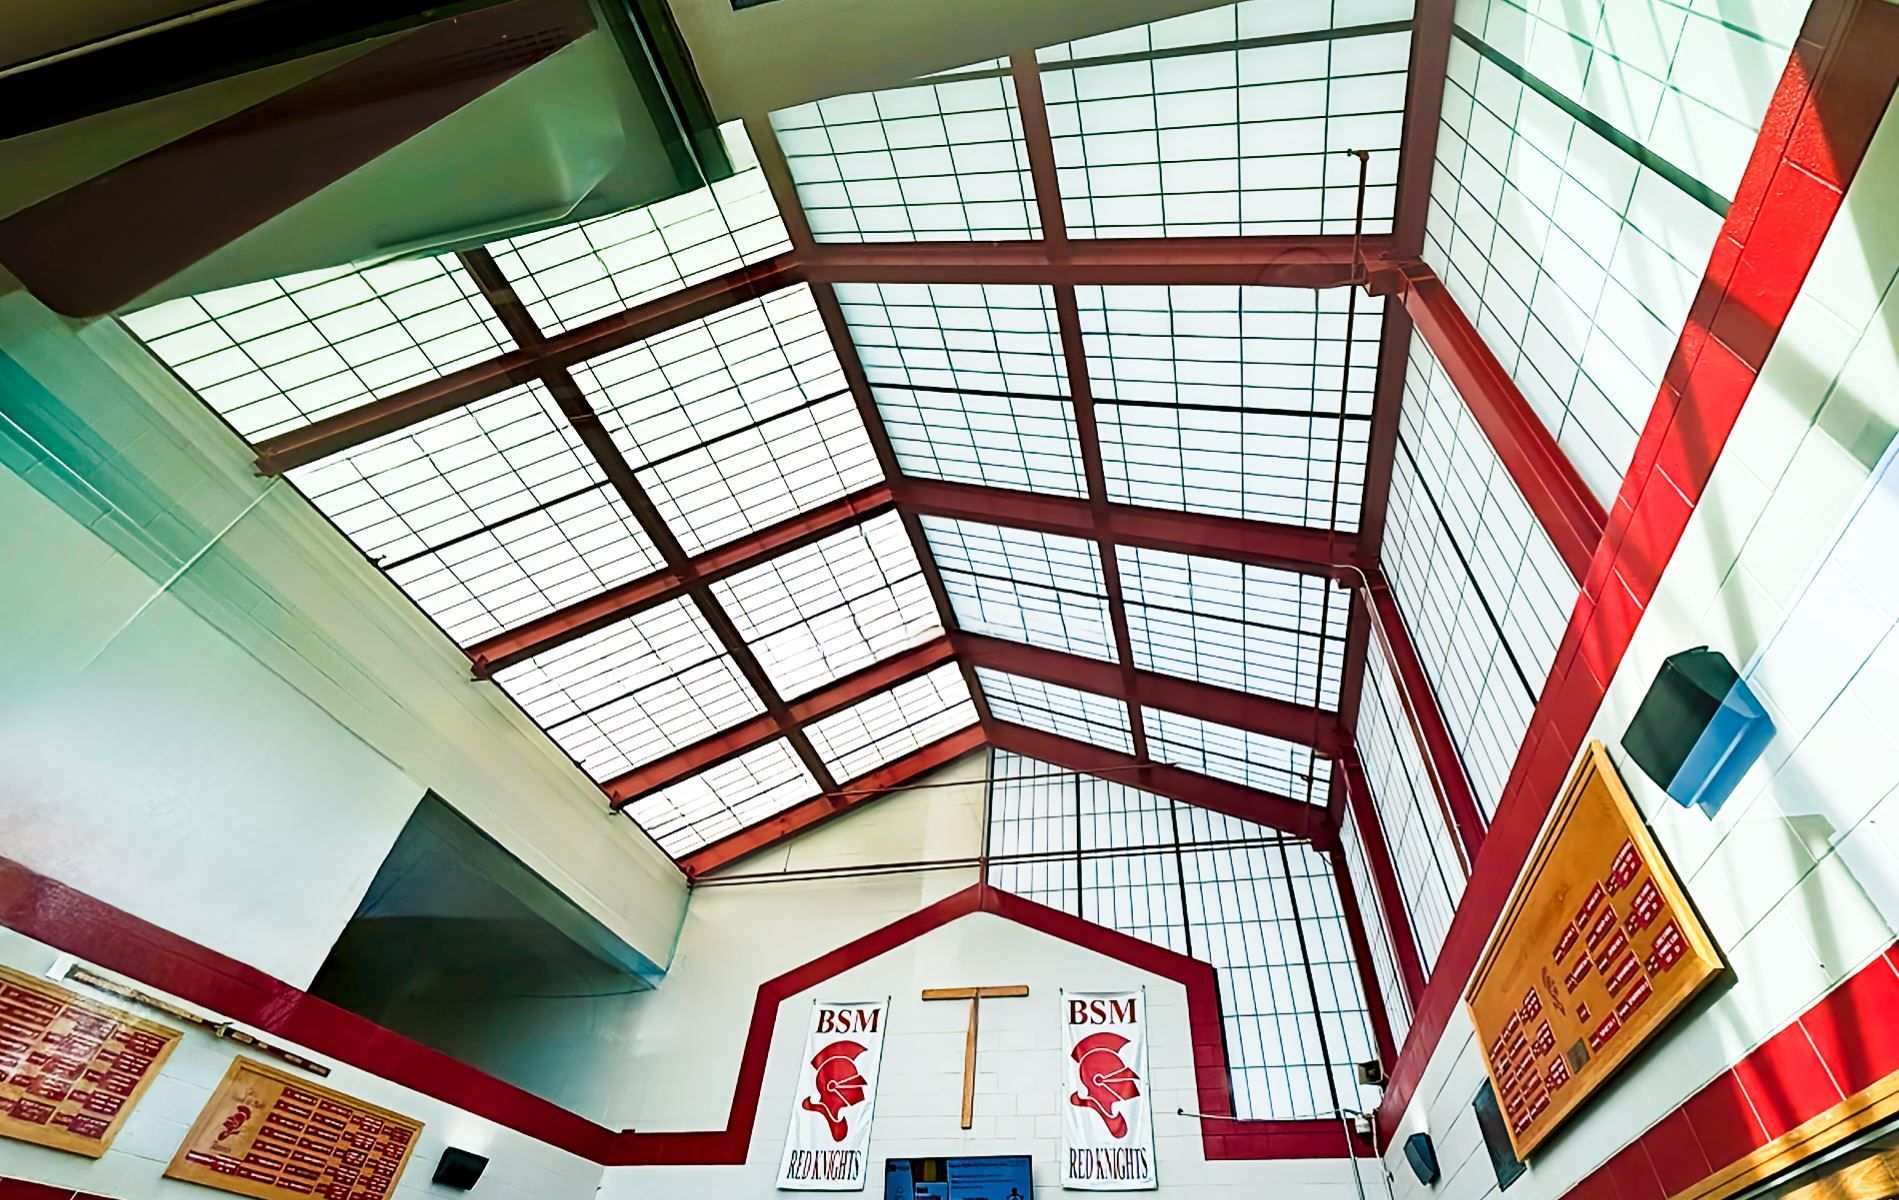 w l hall company Benilde - St. Margaret's (St. Louis Park, MN) Kalwall Translucent Panel Replacement Project 2